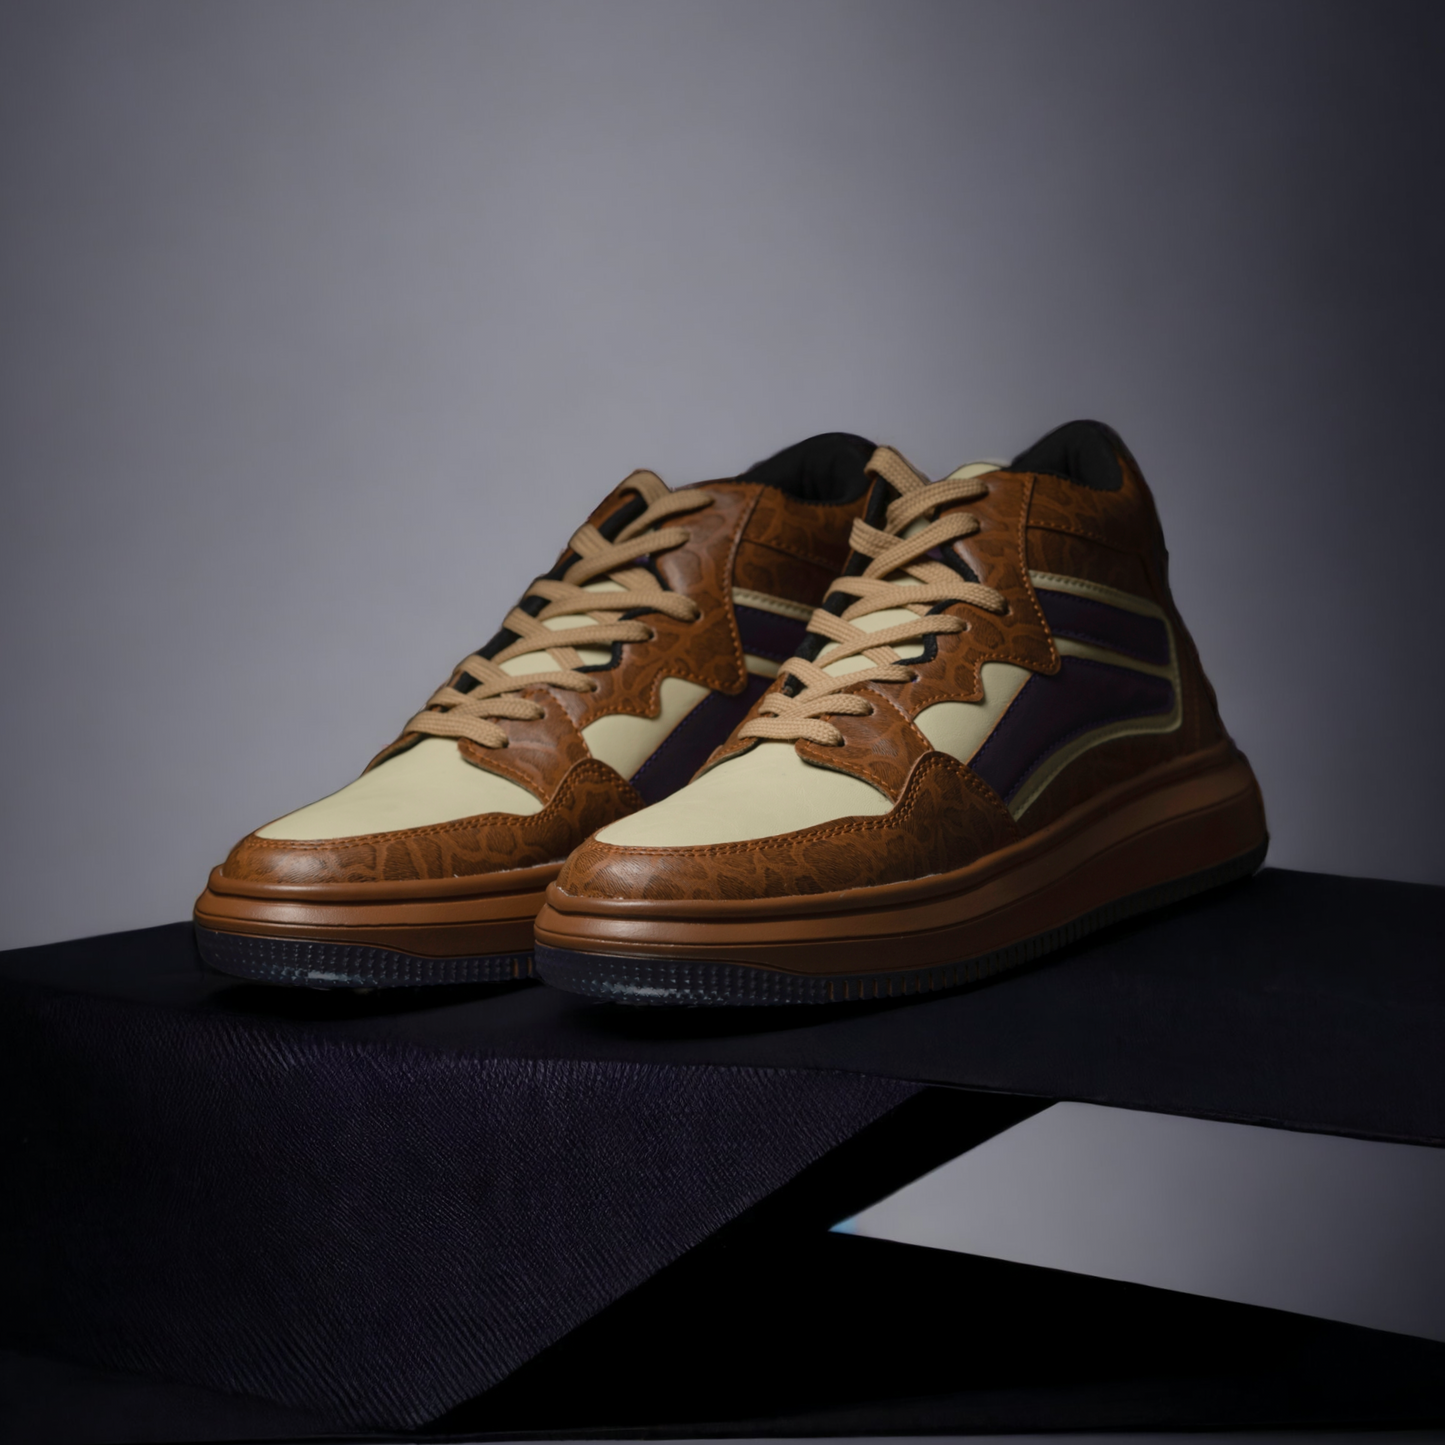 The Aurous Raven Laceup Sneakers